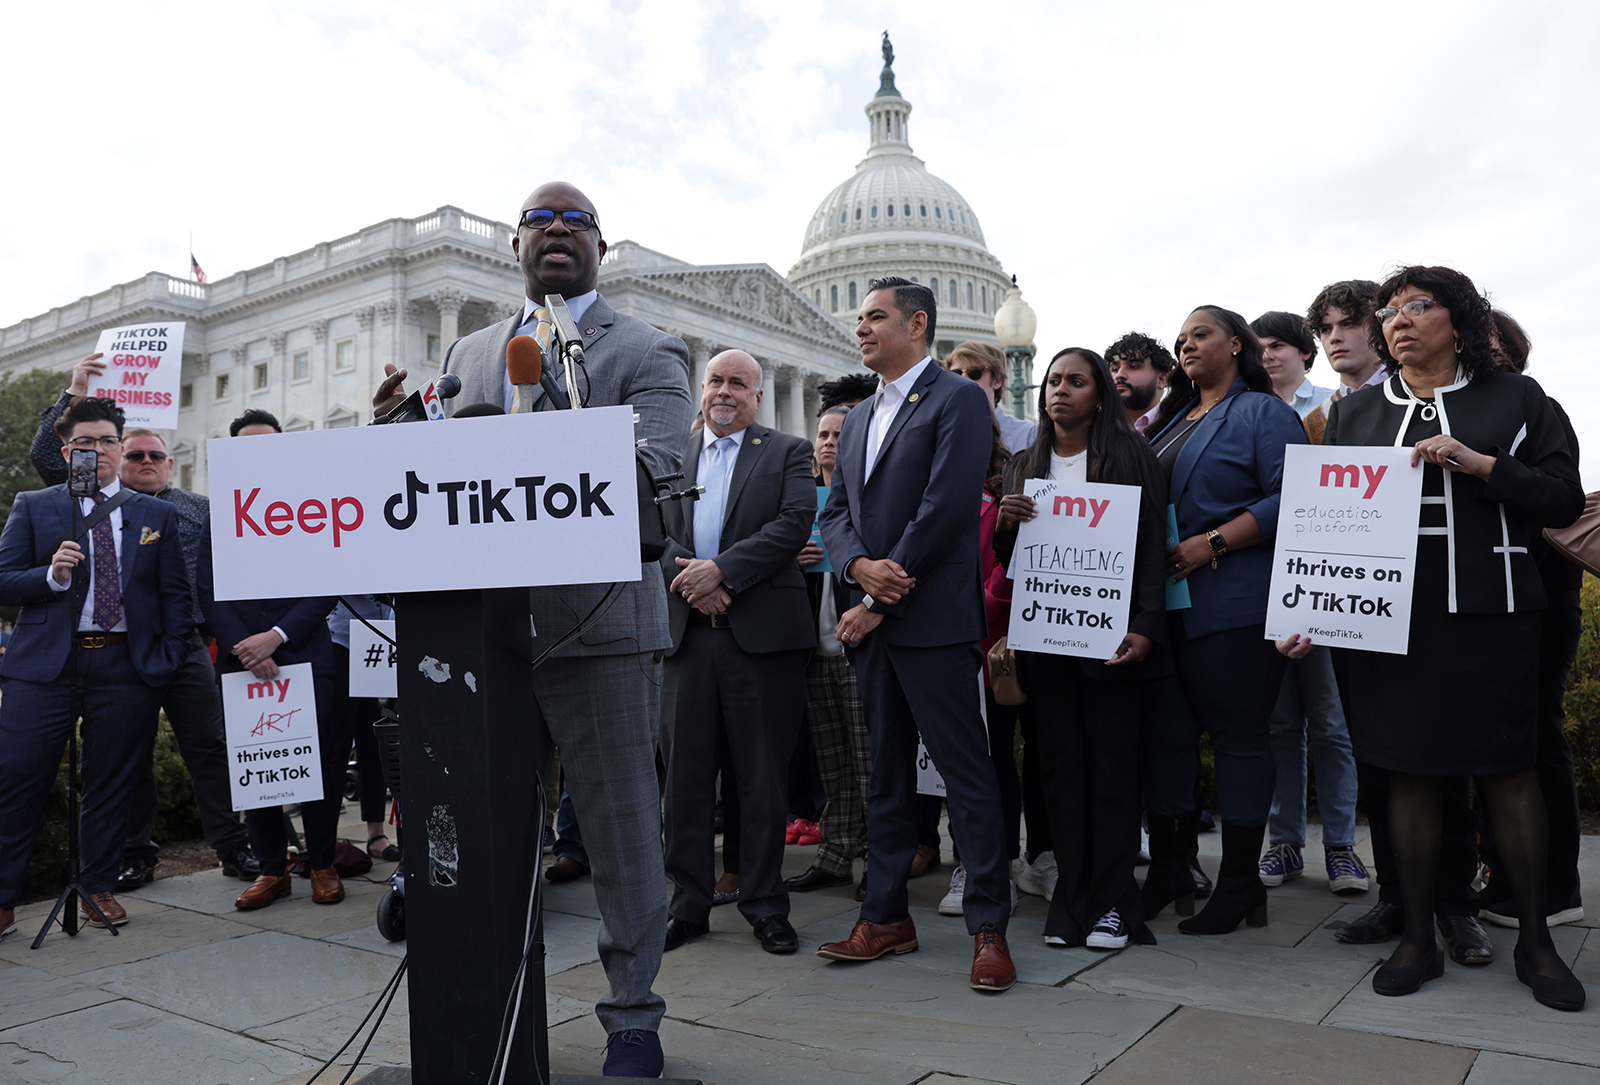  U.S. Rep. Jamaal Bowman (D-NY) speaks as Rep. Mark Pocan (D-WI), Rep. Robert Garcia (D-CA) and supporters of TikTok listen during a news conference on March 22, in Washington, DC. TikTok CEO Shou Chew will testify before the House Energy and Commerce Committee tomorrow on whether the video-sharing app is safeguarding user data on the platform. 